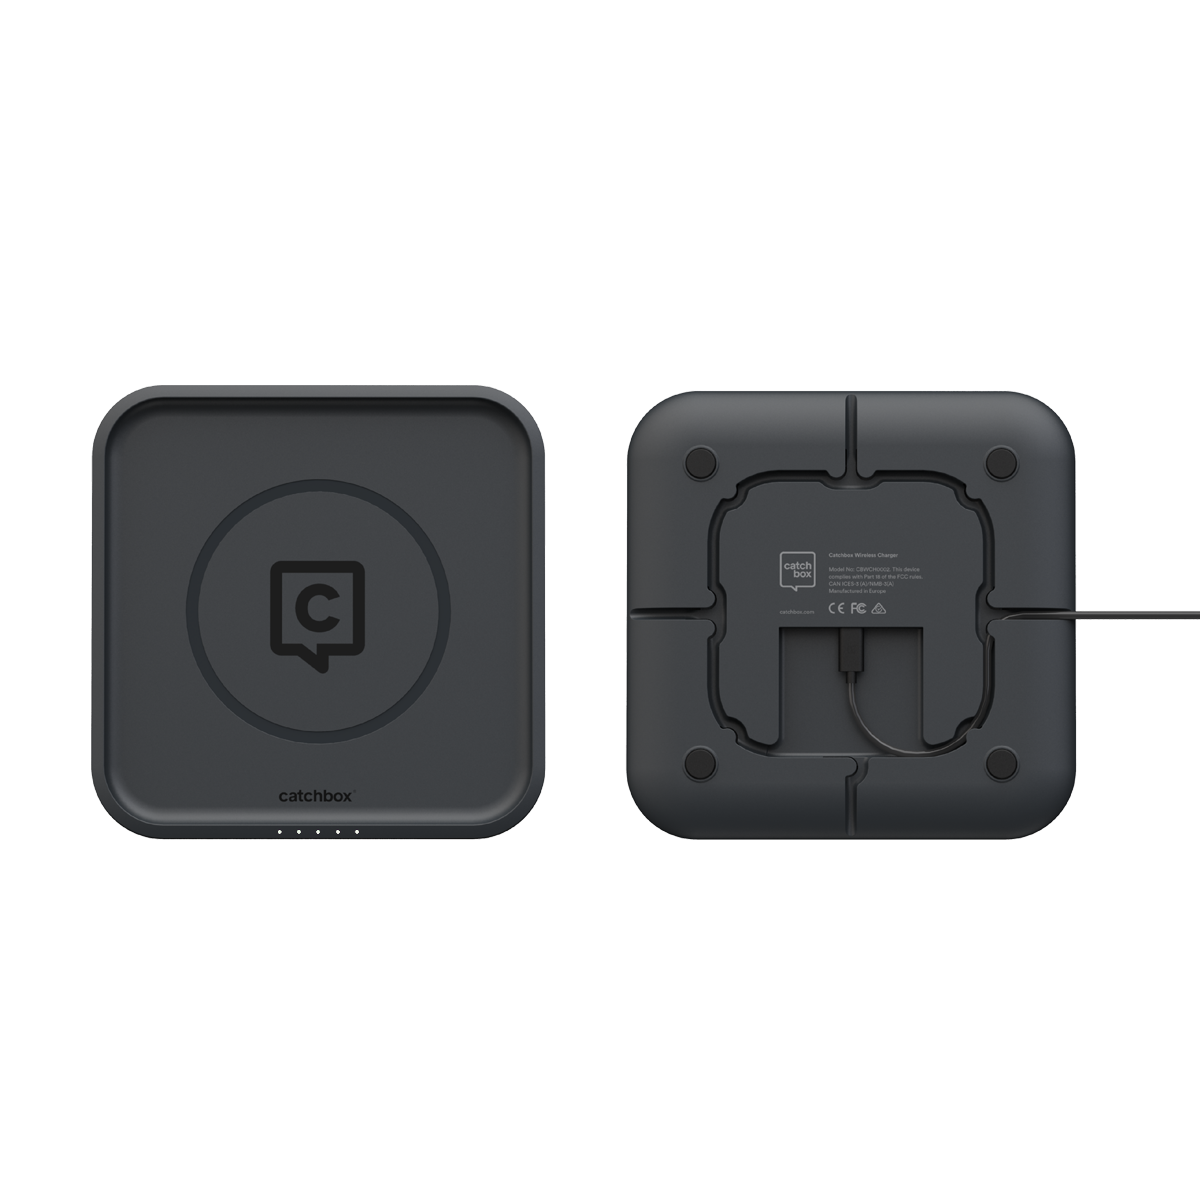 Catchbox Plus Bundle - 1 Cube Throw Microphone Grey - 1 Clip Wireless Lapel Microphone Pink - with Wireless Charger